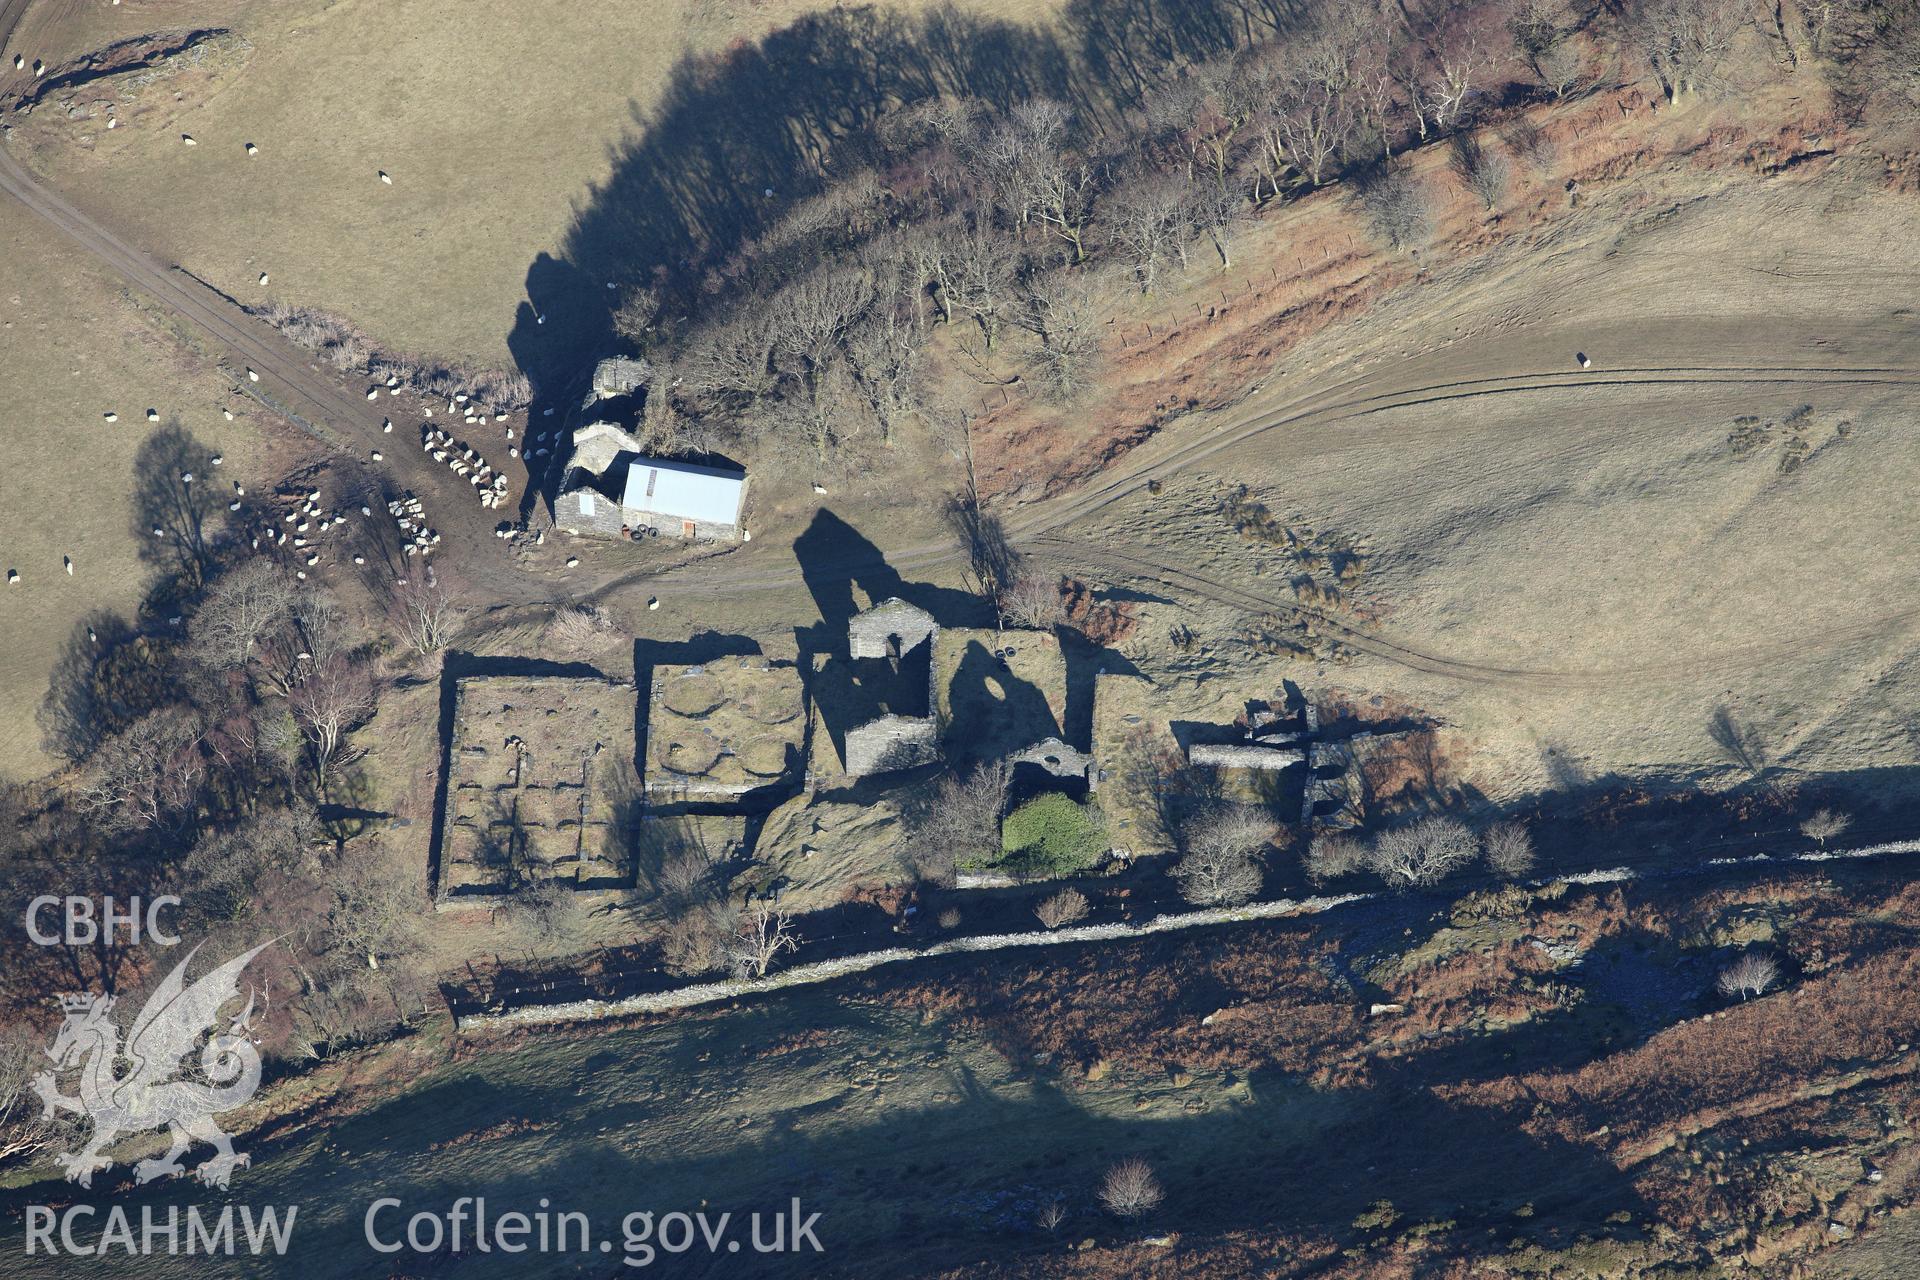 RCAHMW colour oblique photograph of Bryndyfi lead mine. Taken by Toby Driver on 08/03/2010.